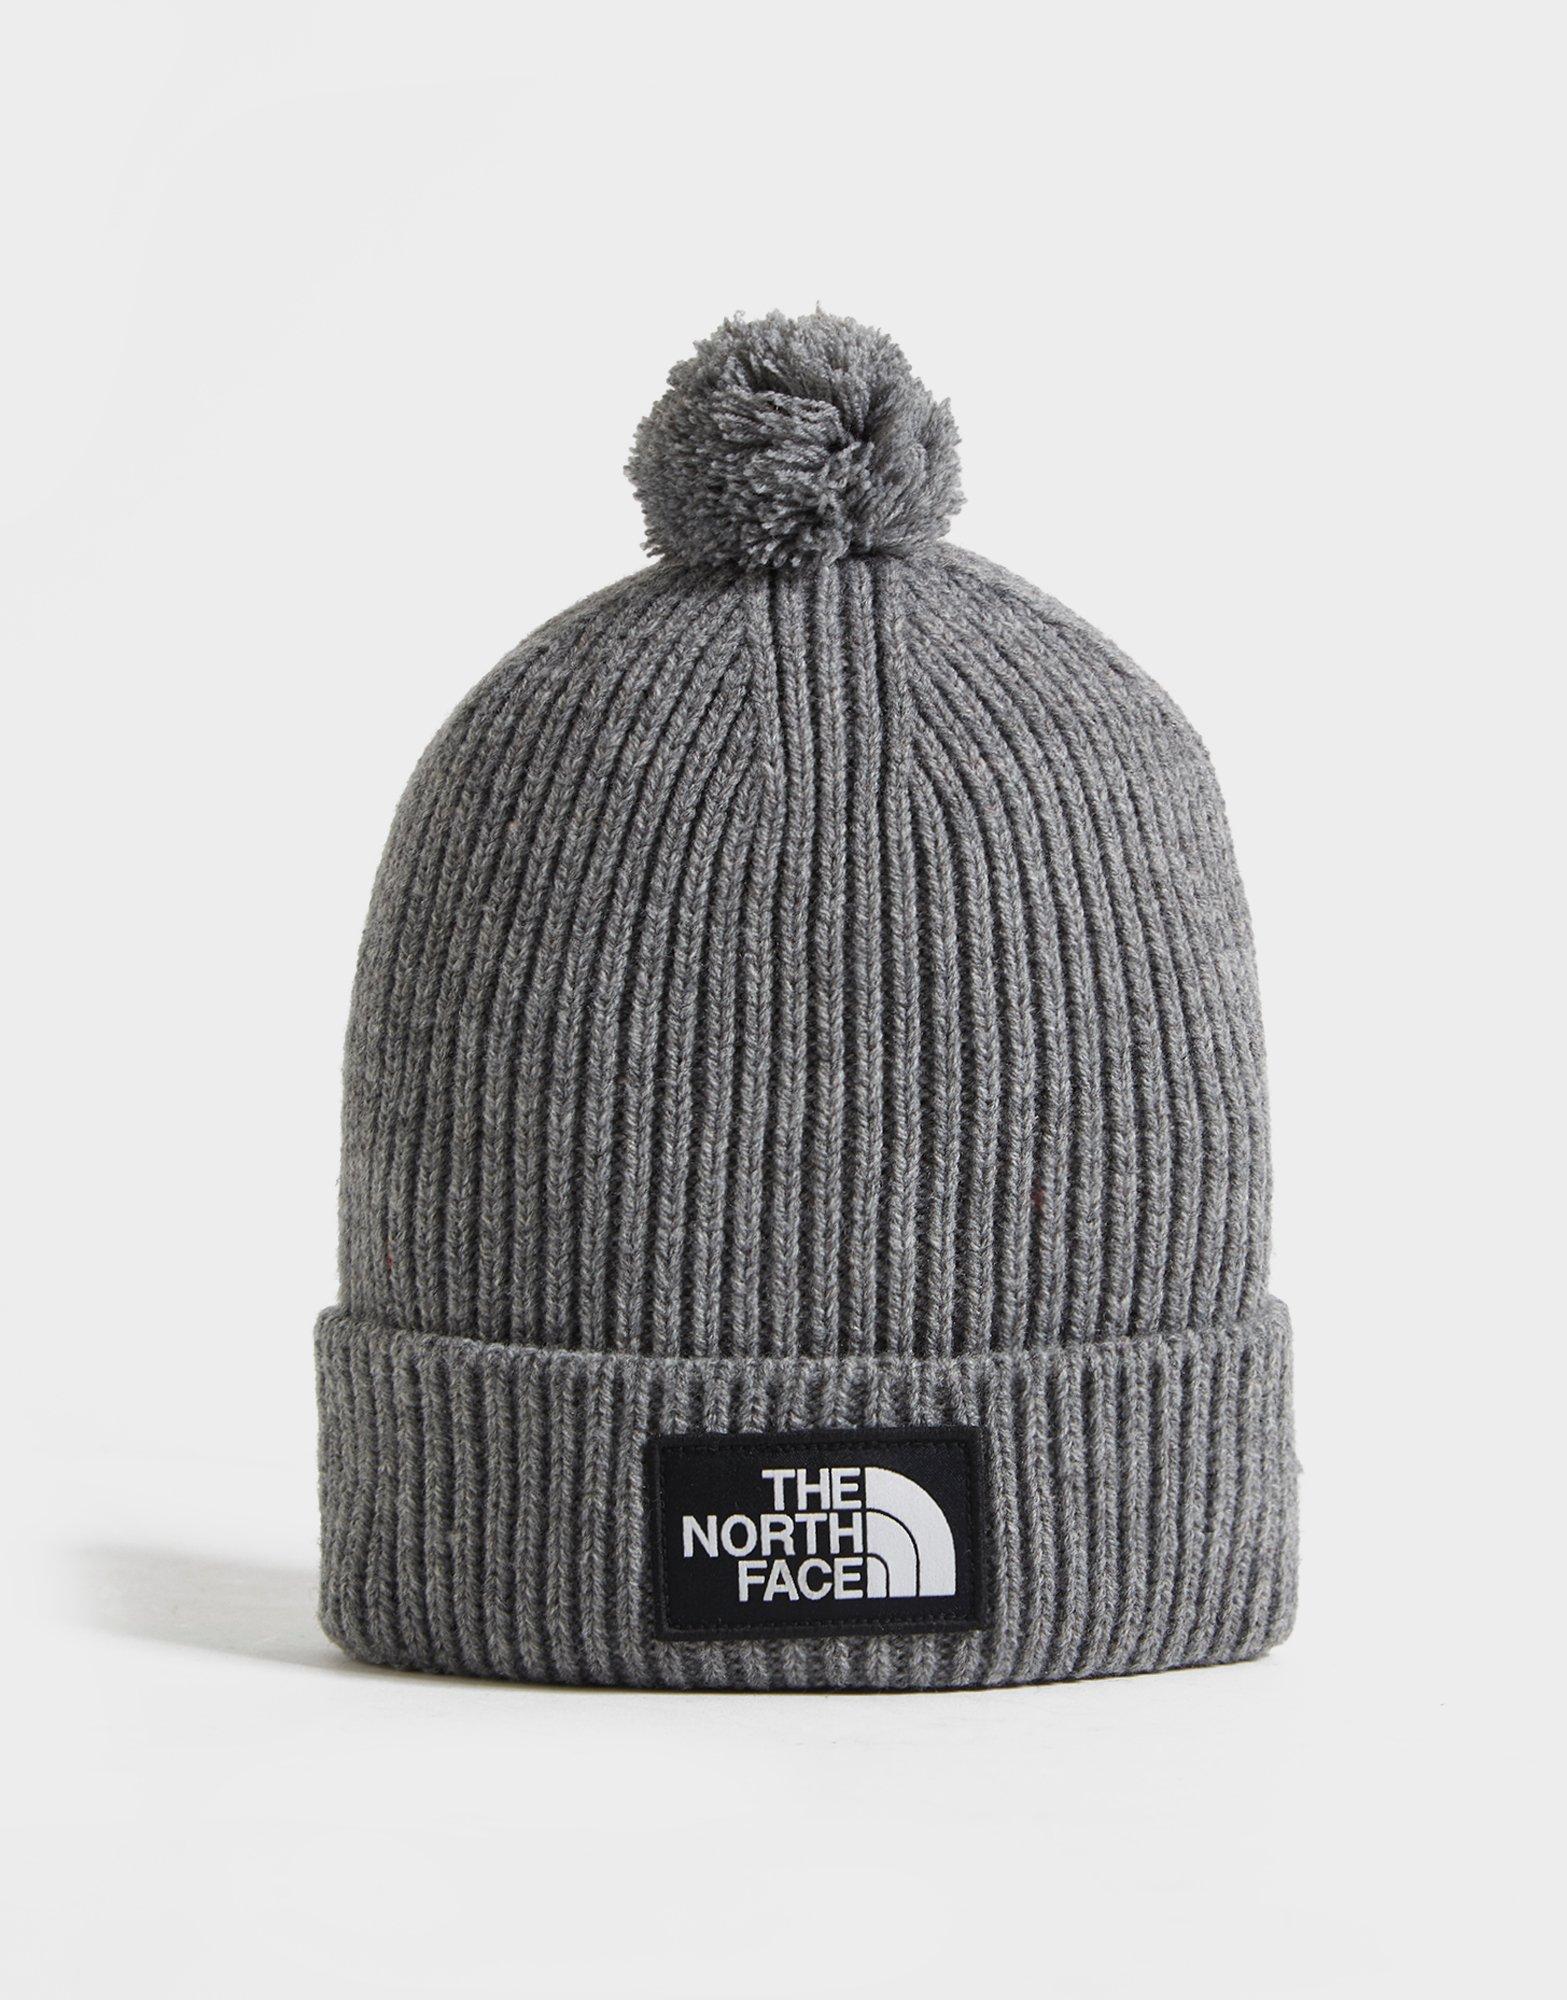 north face hat jd